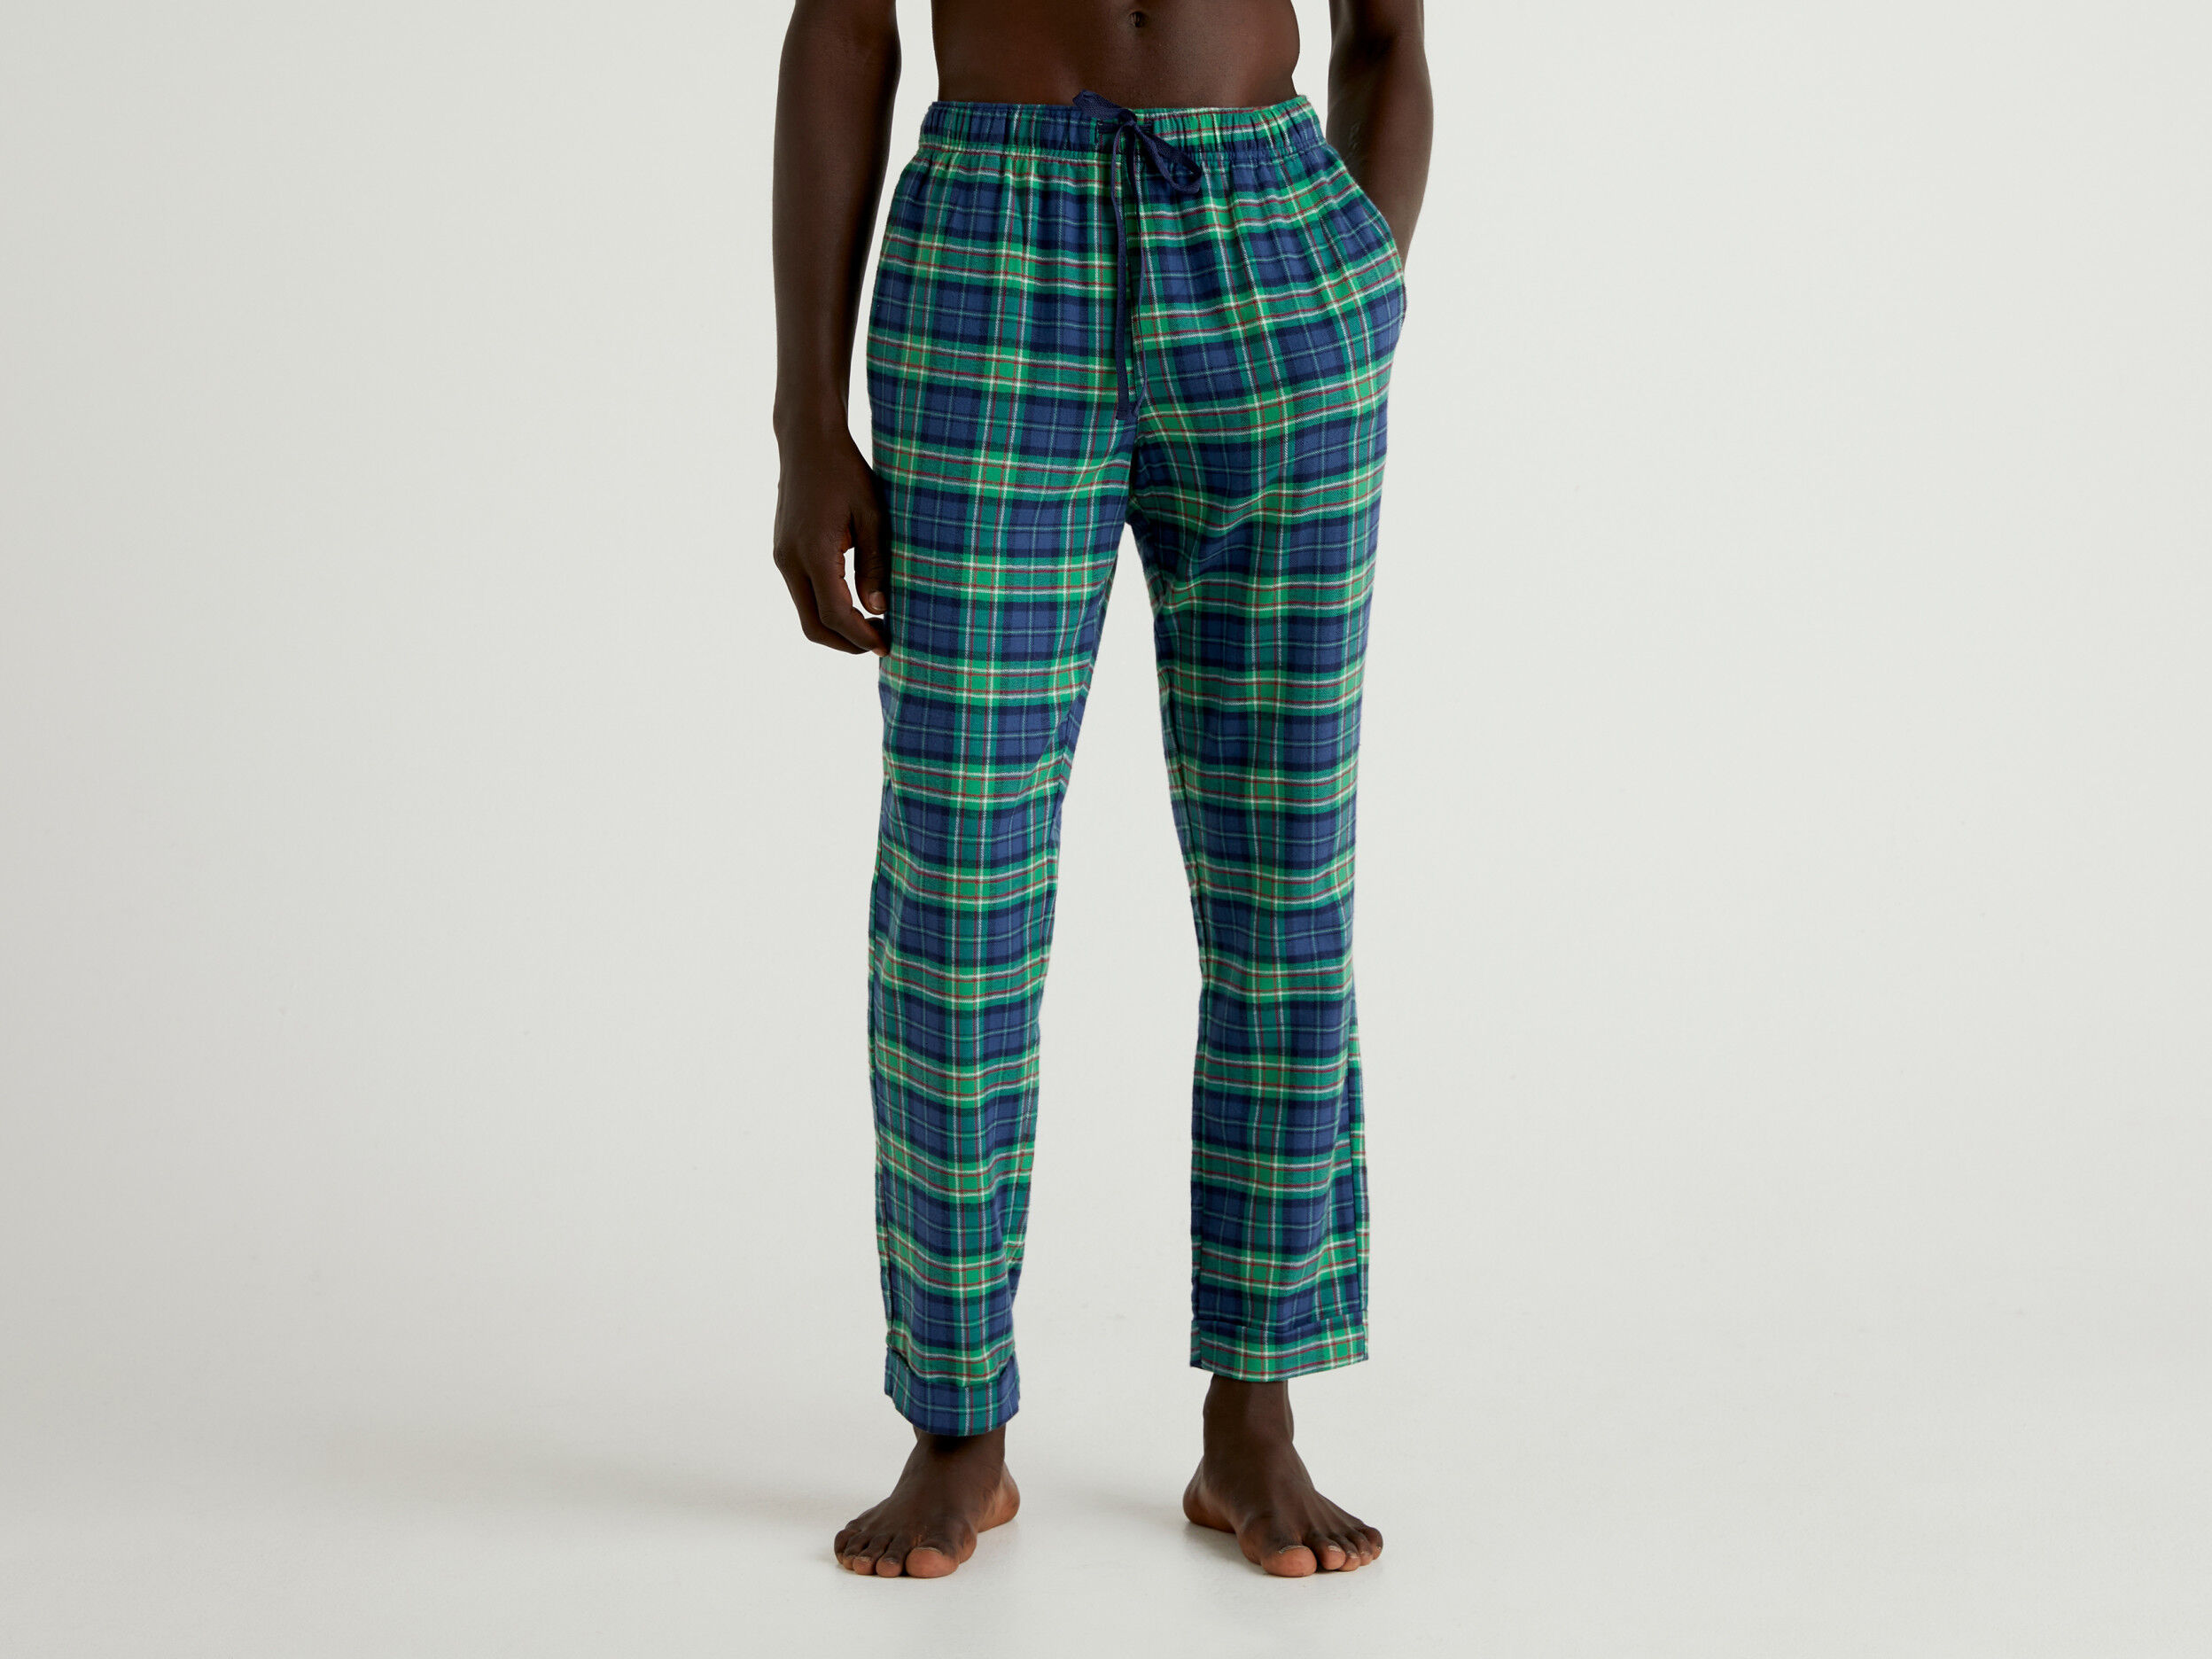 Relaxed Fit Wool-blend trousers - Green/Black checked - Men | H&M IN